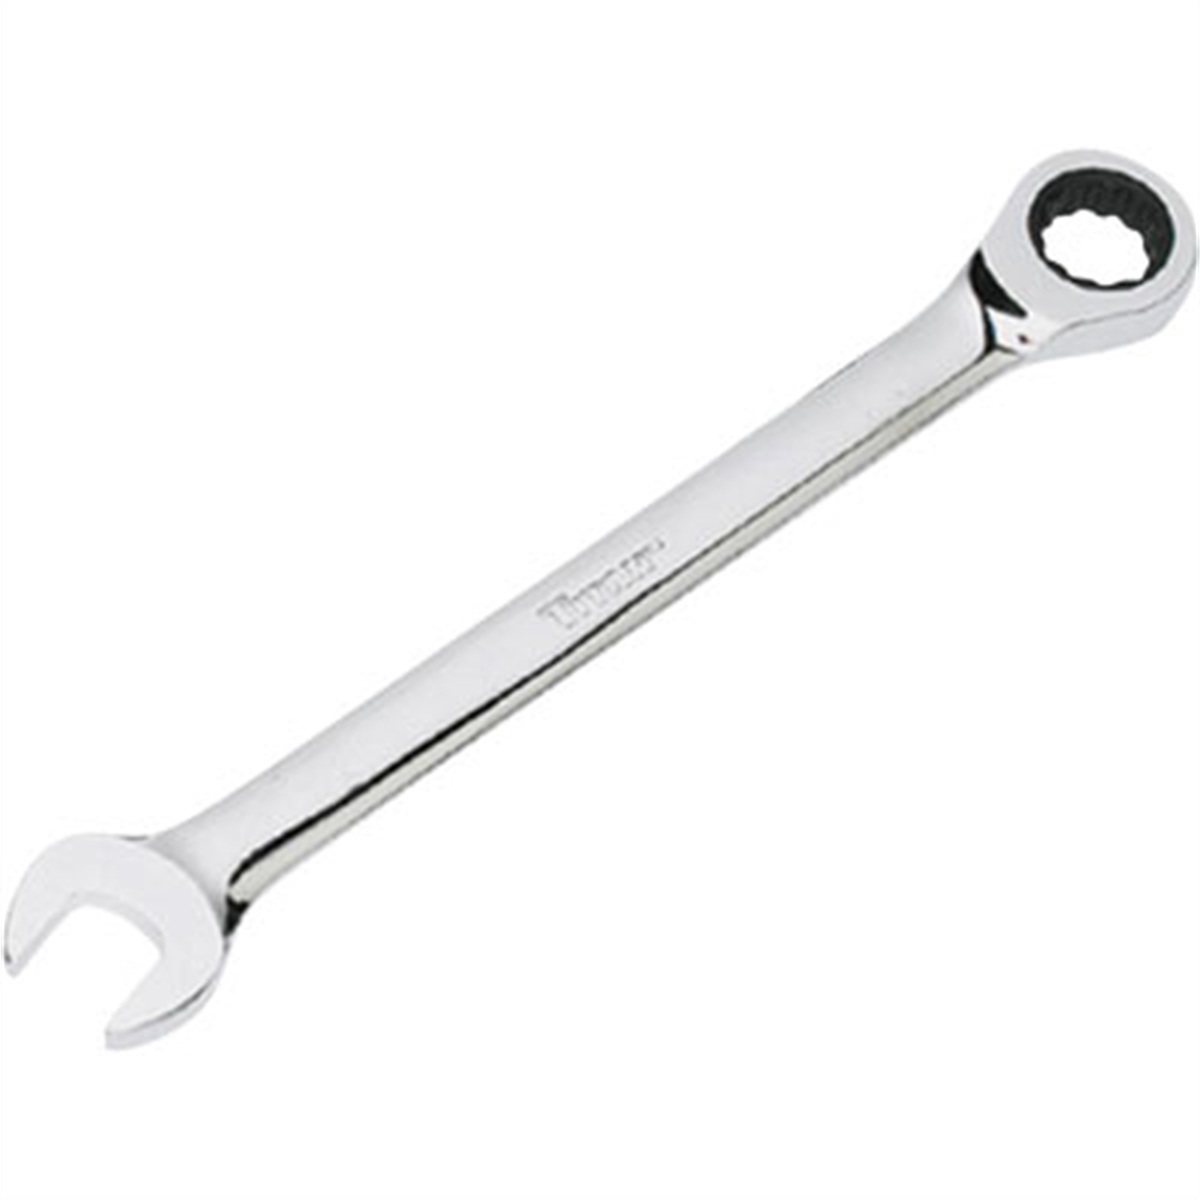 11mm ratcheting wrench